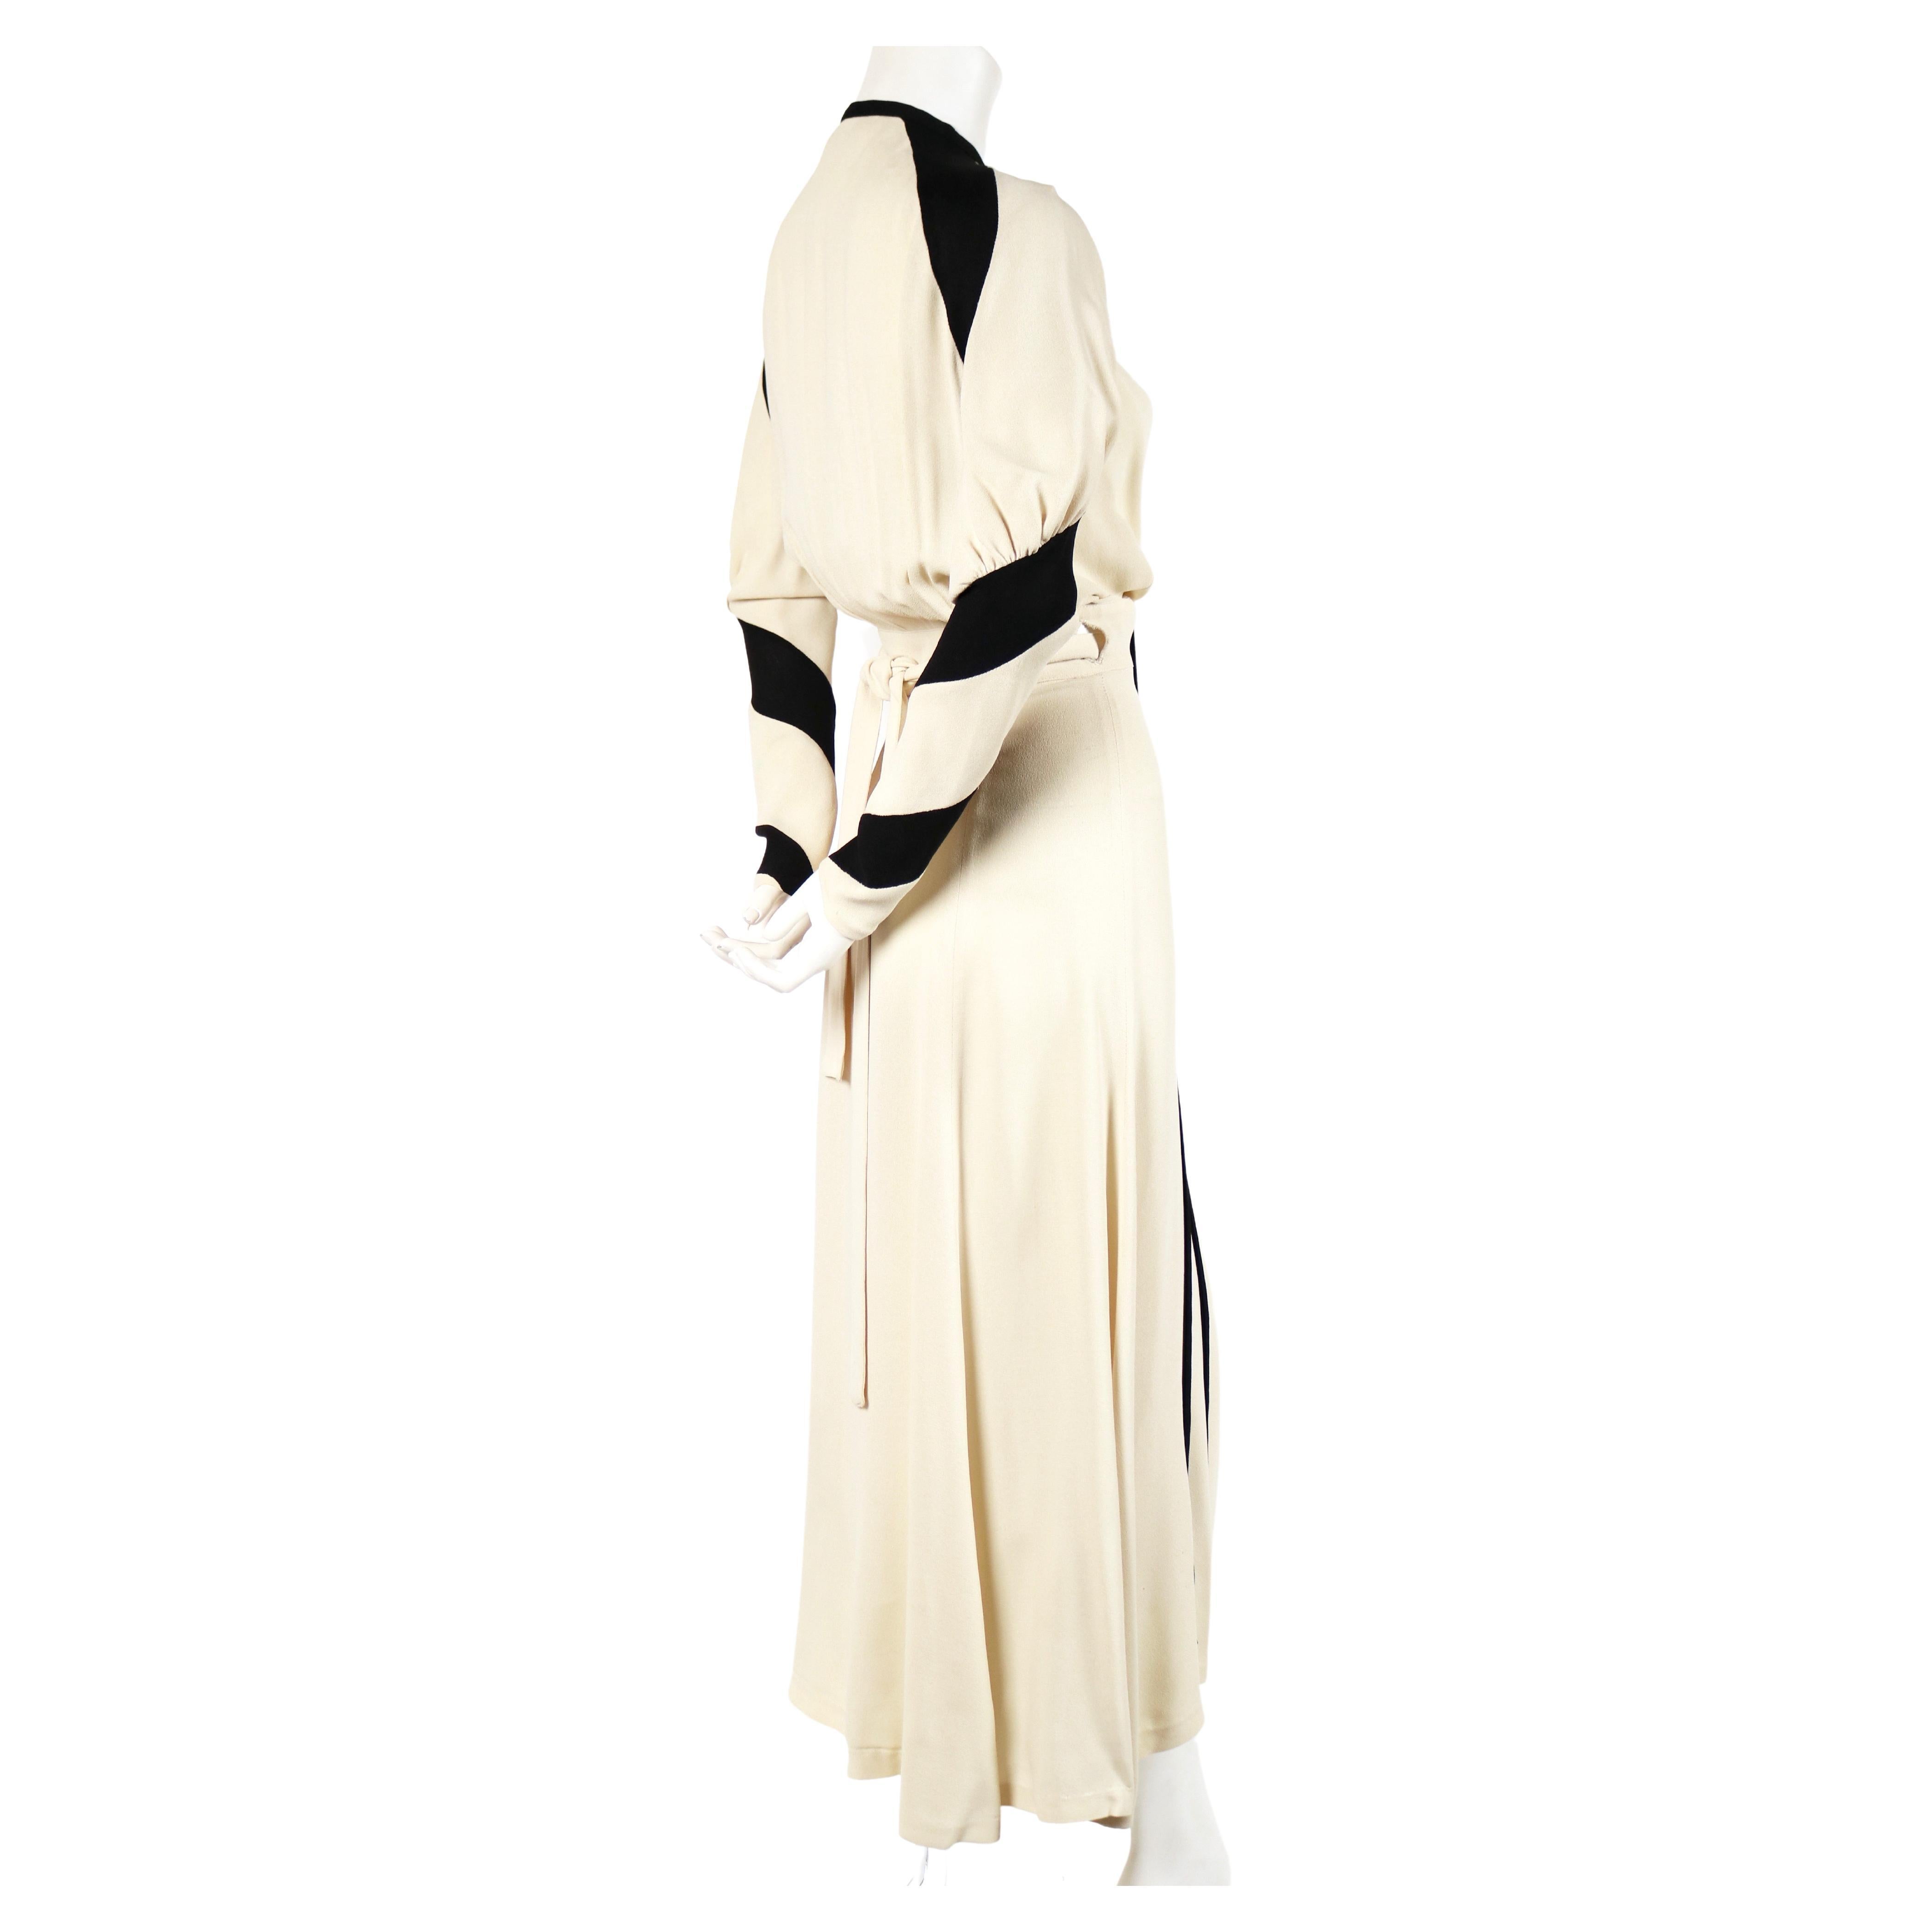 Very rare cream and black moss crepe dress designed by Ossie Clark for Quorum dating to 1970. Ossie Clark's wife at the time, textile designer Celia Birtwell, was painted in this dress in another colorway by David Hockney. This portrait was a